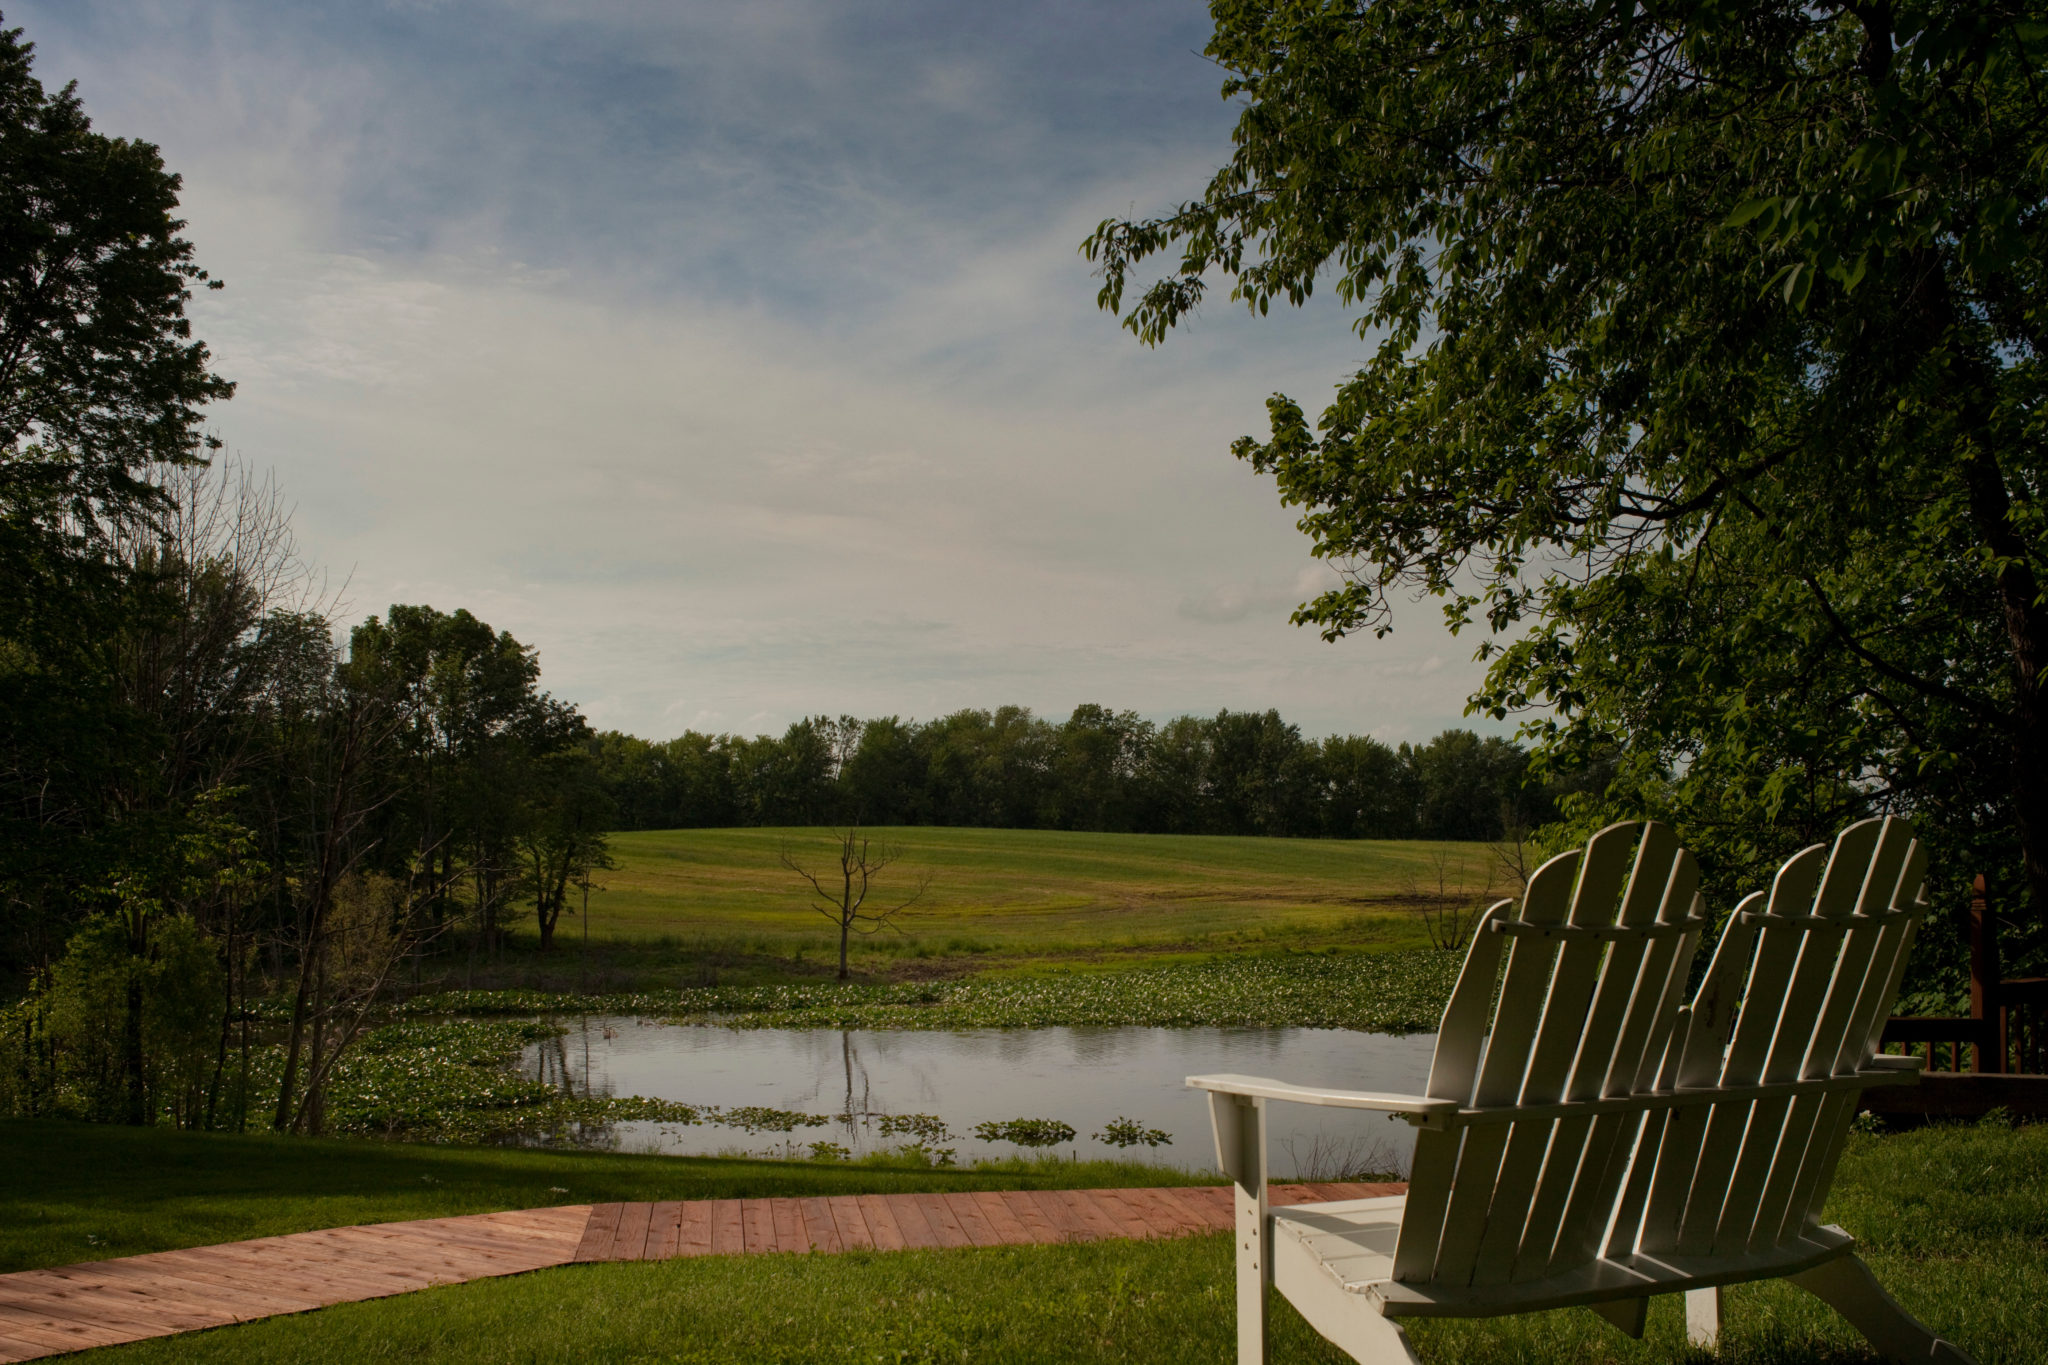 Adirondack chairs overlooking the pond